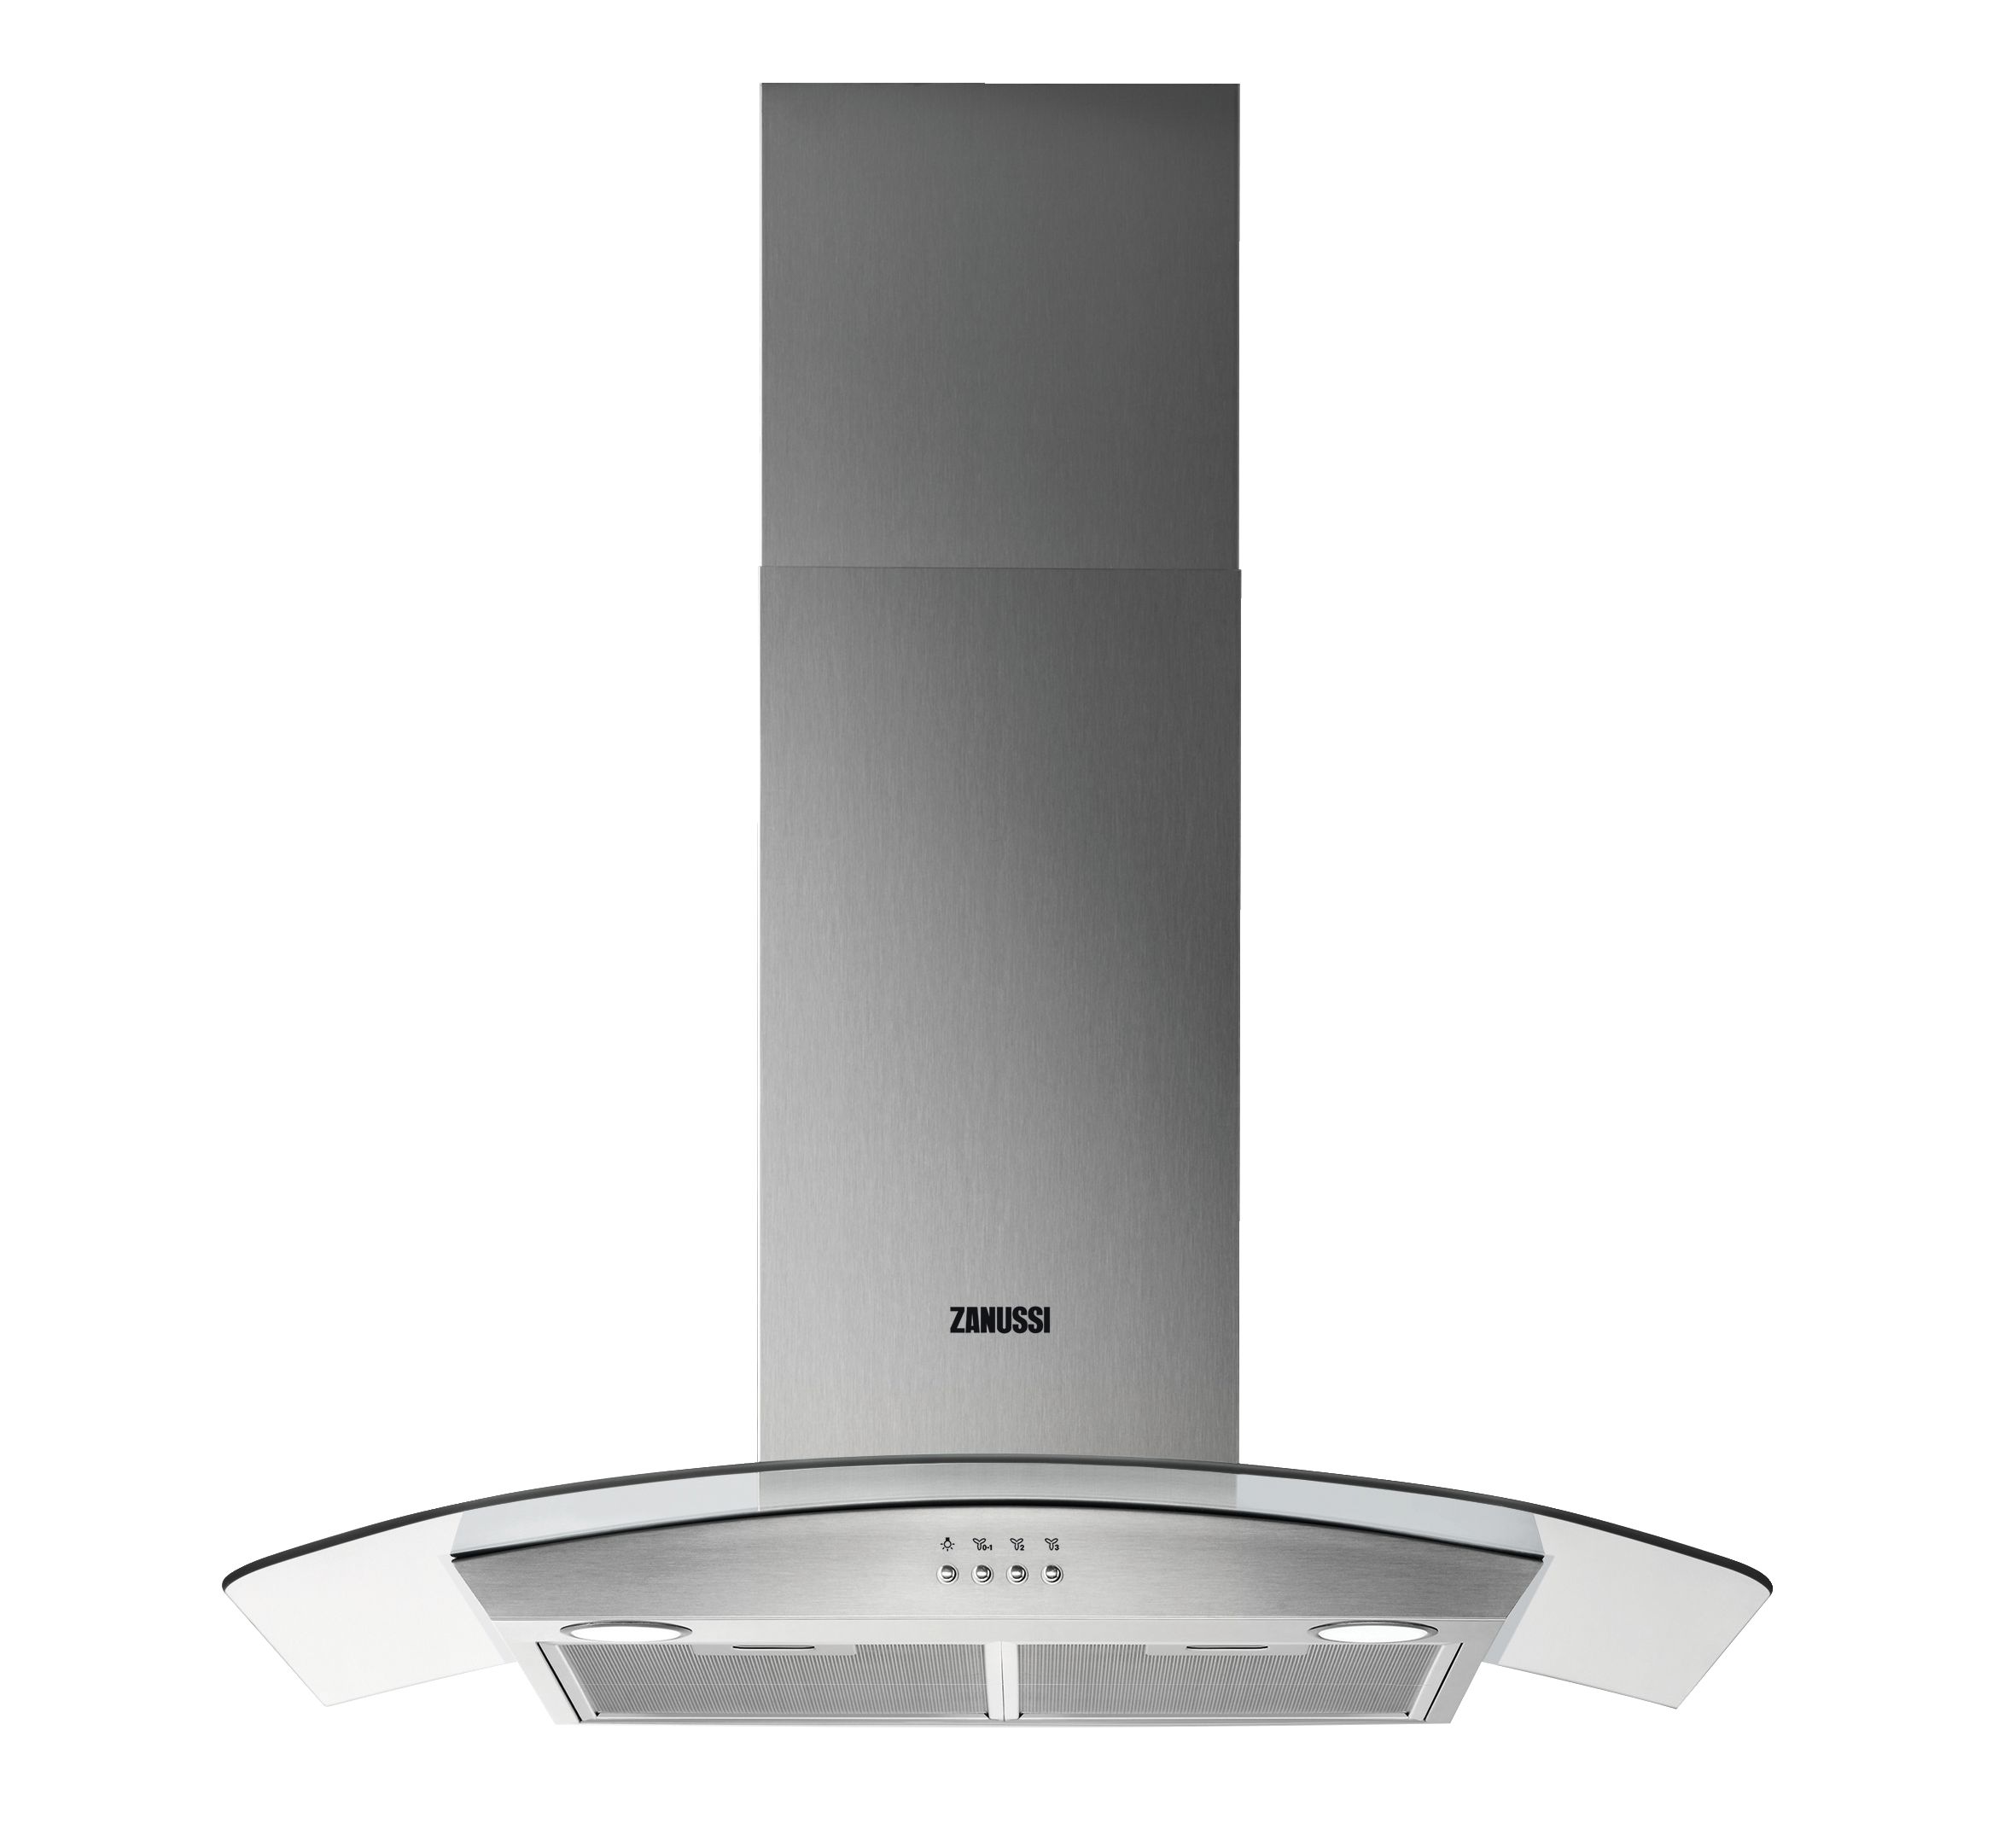 Image of Zanussi ZHC92352X 90cm Chimney Hood with Curved Glass - Stainless Steel